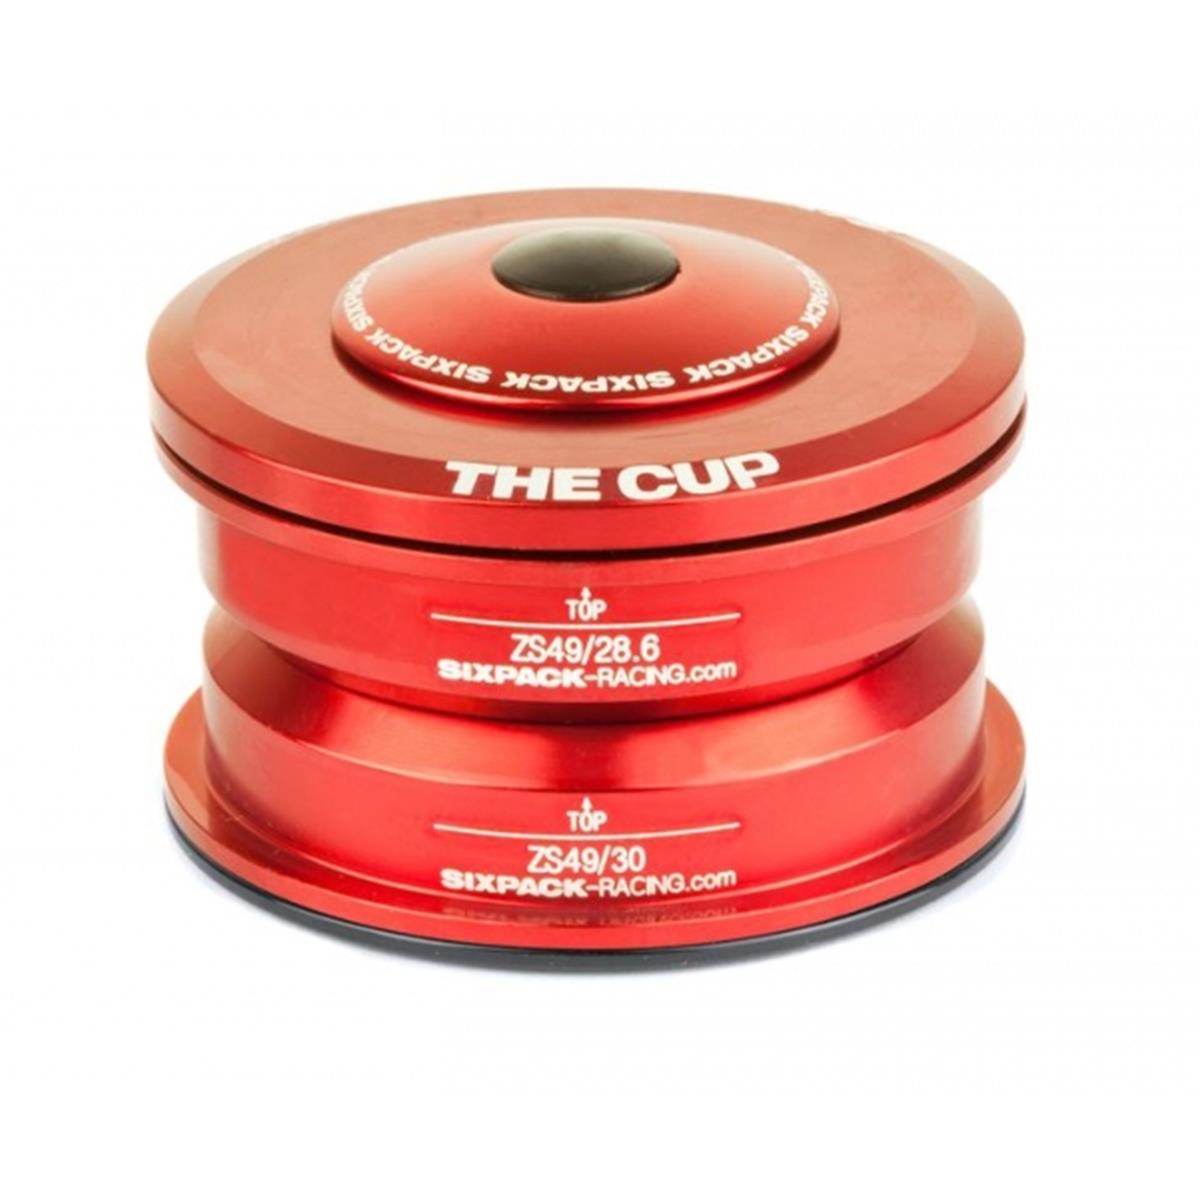 Sixpack Steuersatz The Cup Rot, ZS49/28.6 I ZS49/30